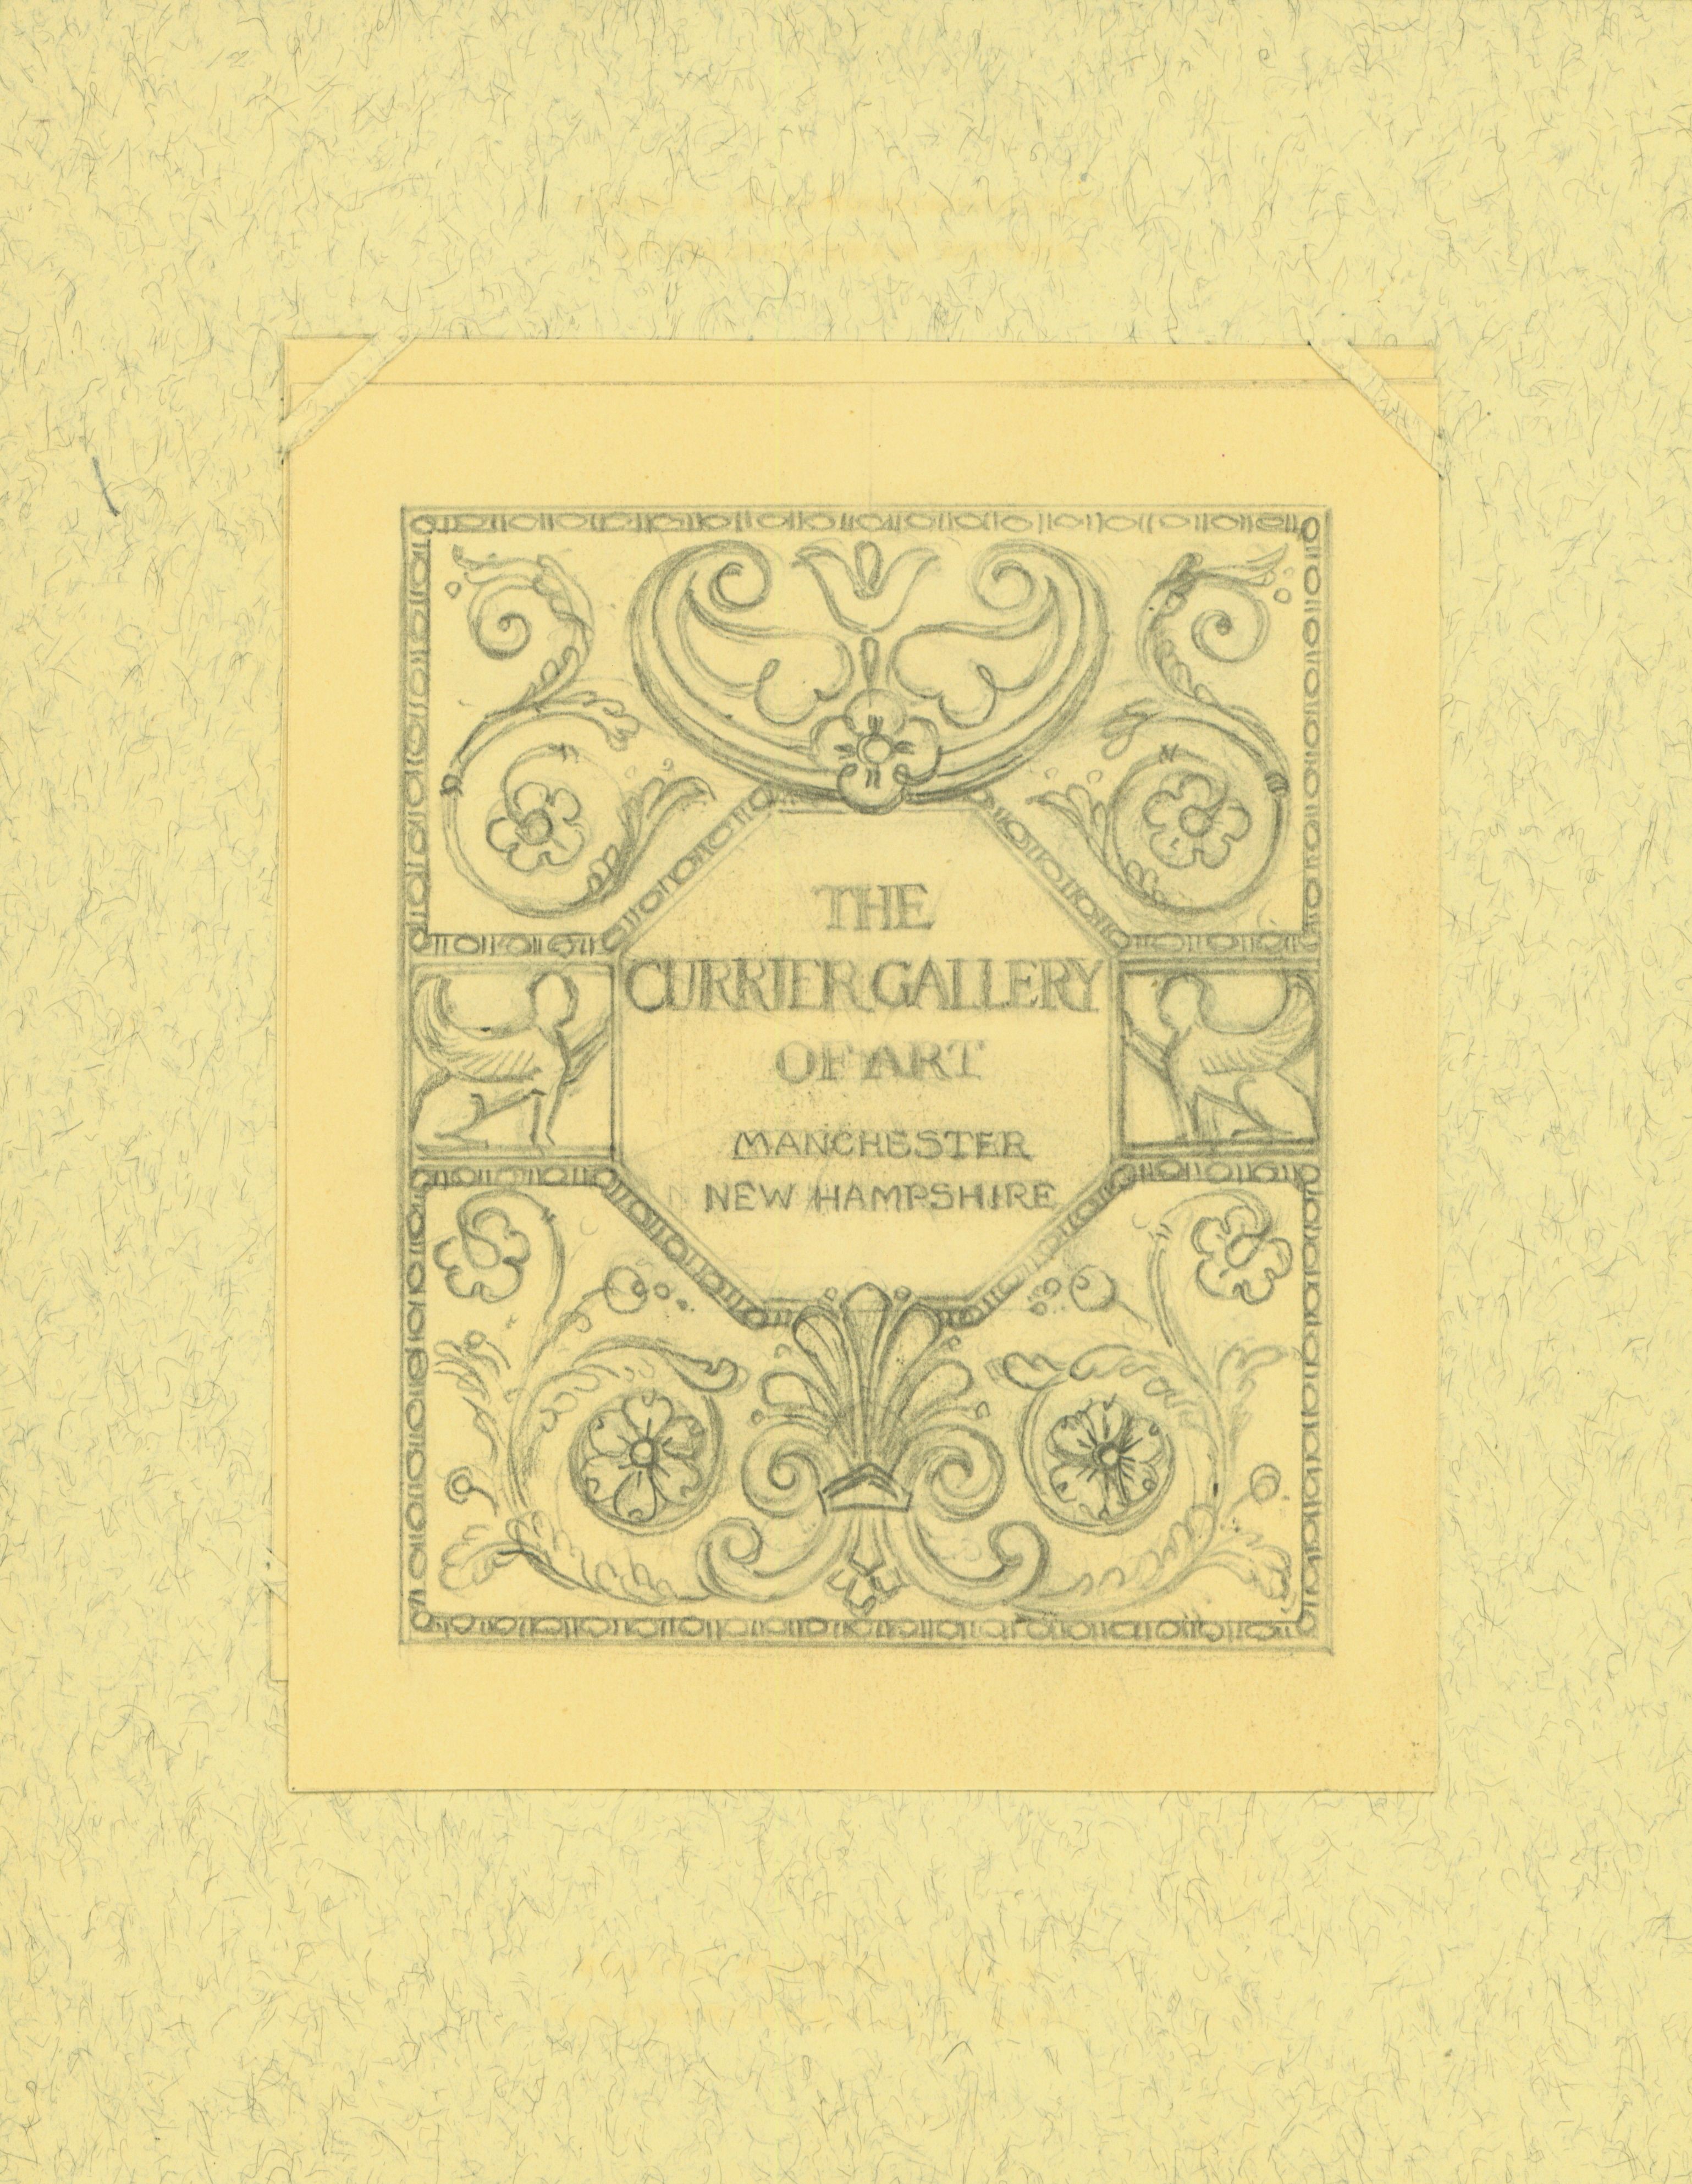 Scan of sketch of bookplate for the Currier Gallery of Art.